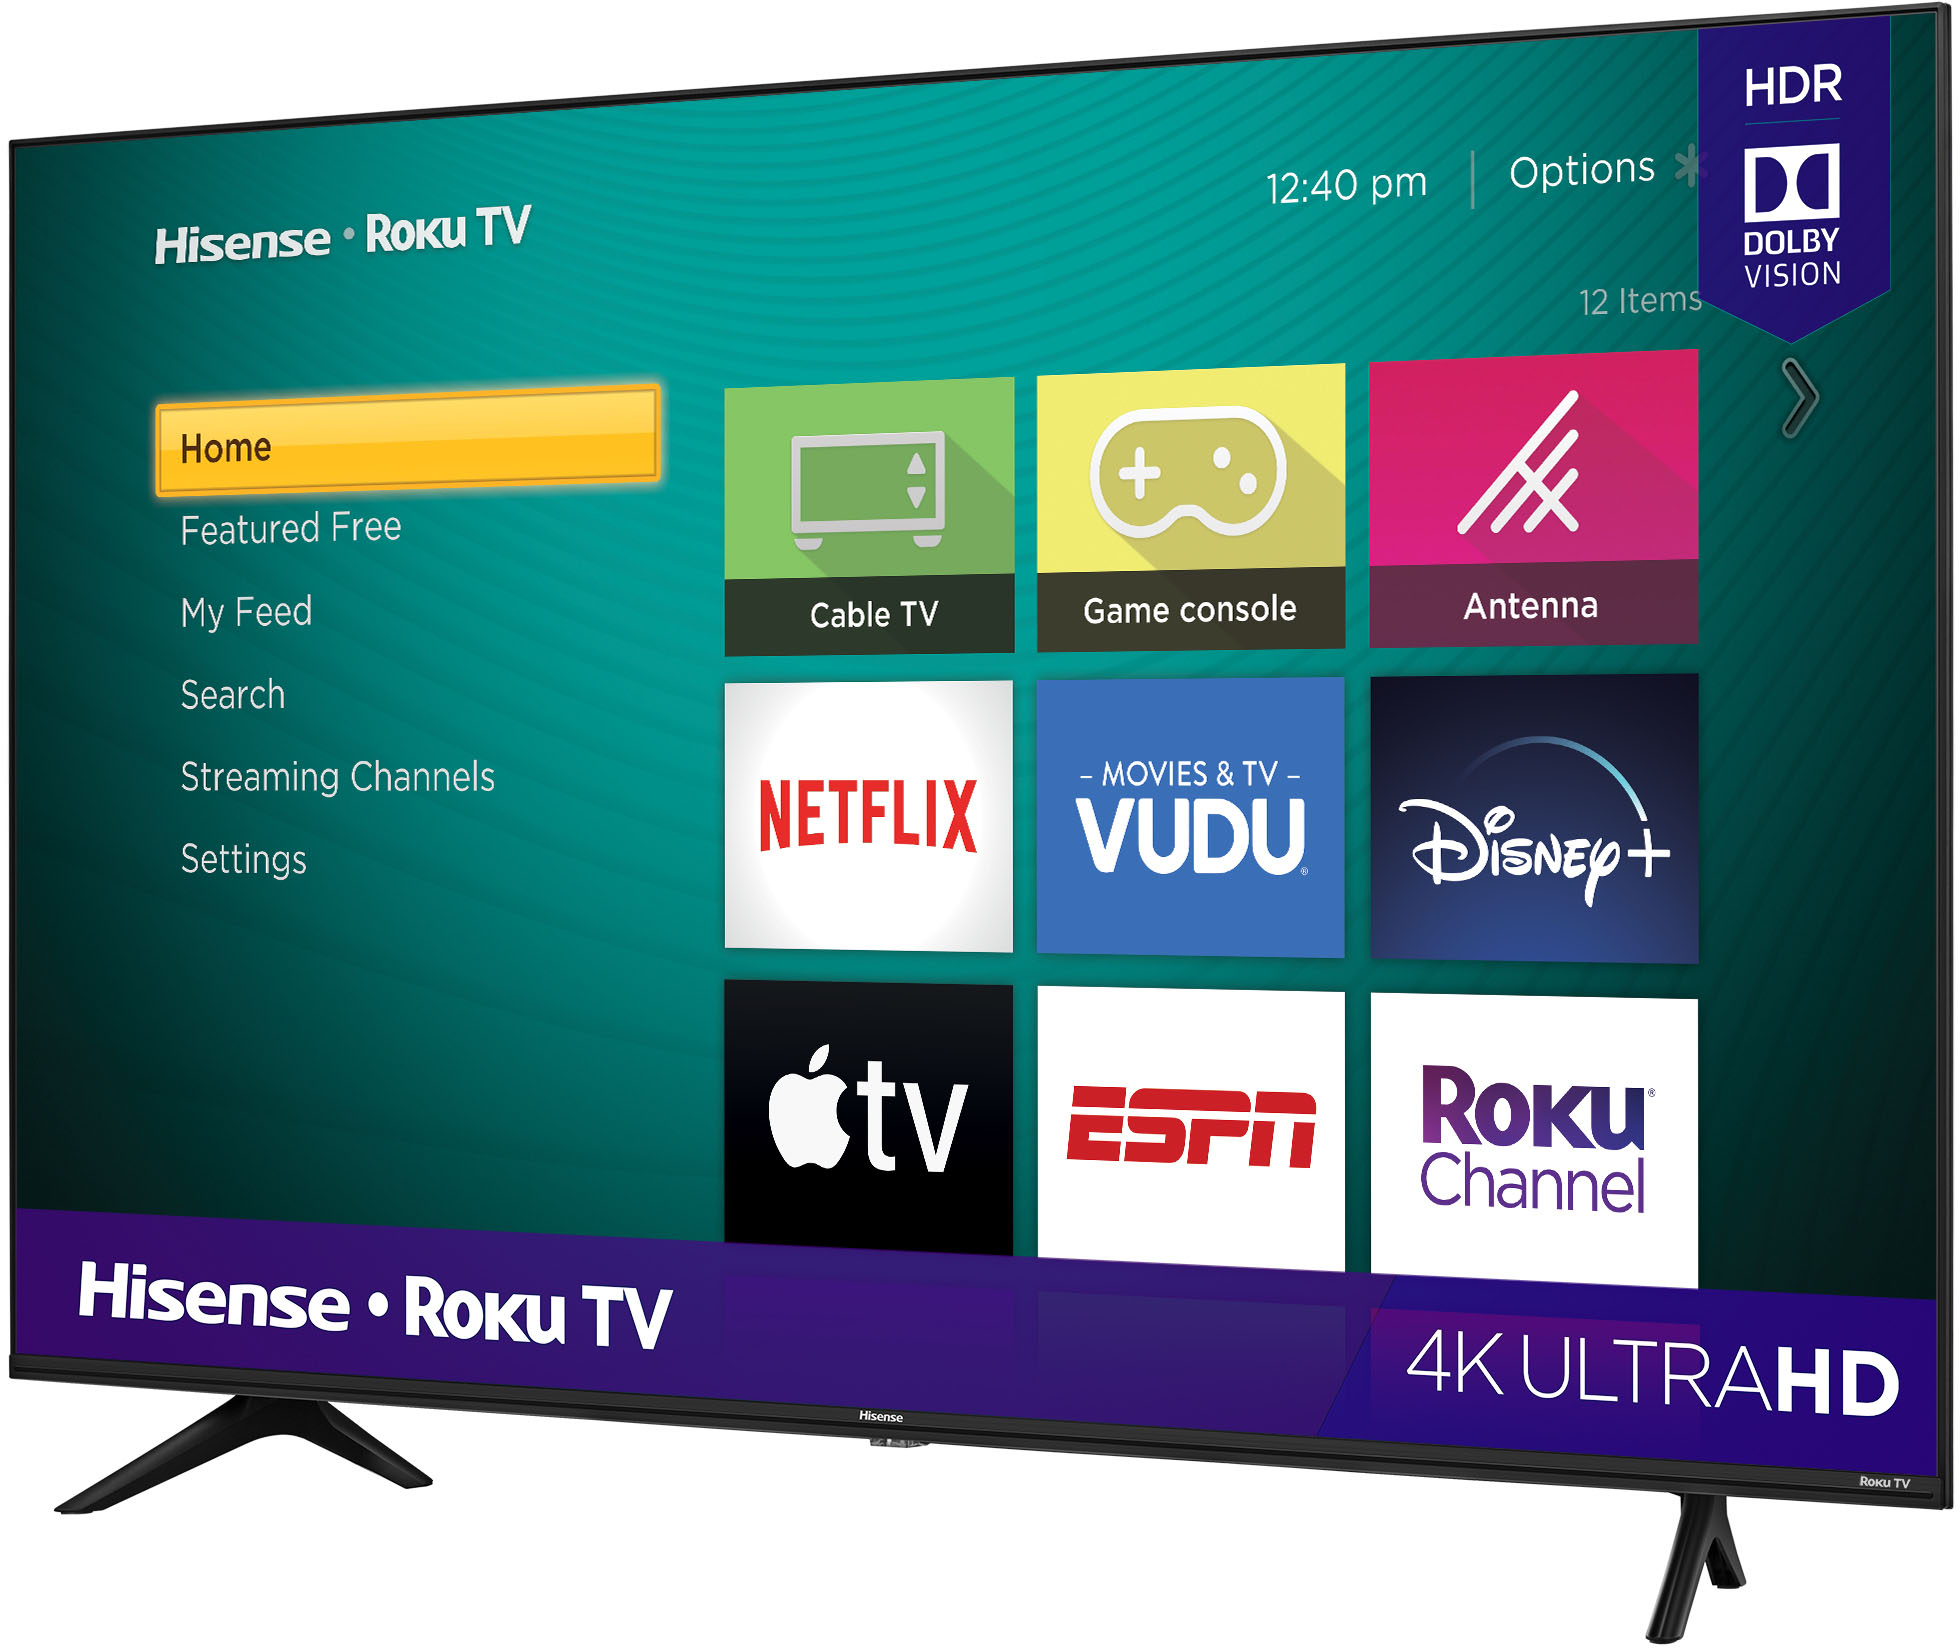 Roku TV – Learn about Smart TVs with Roku streaming built-in